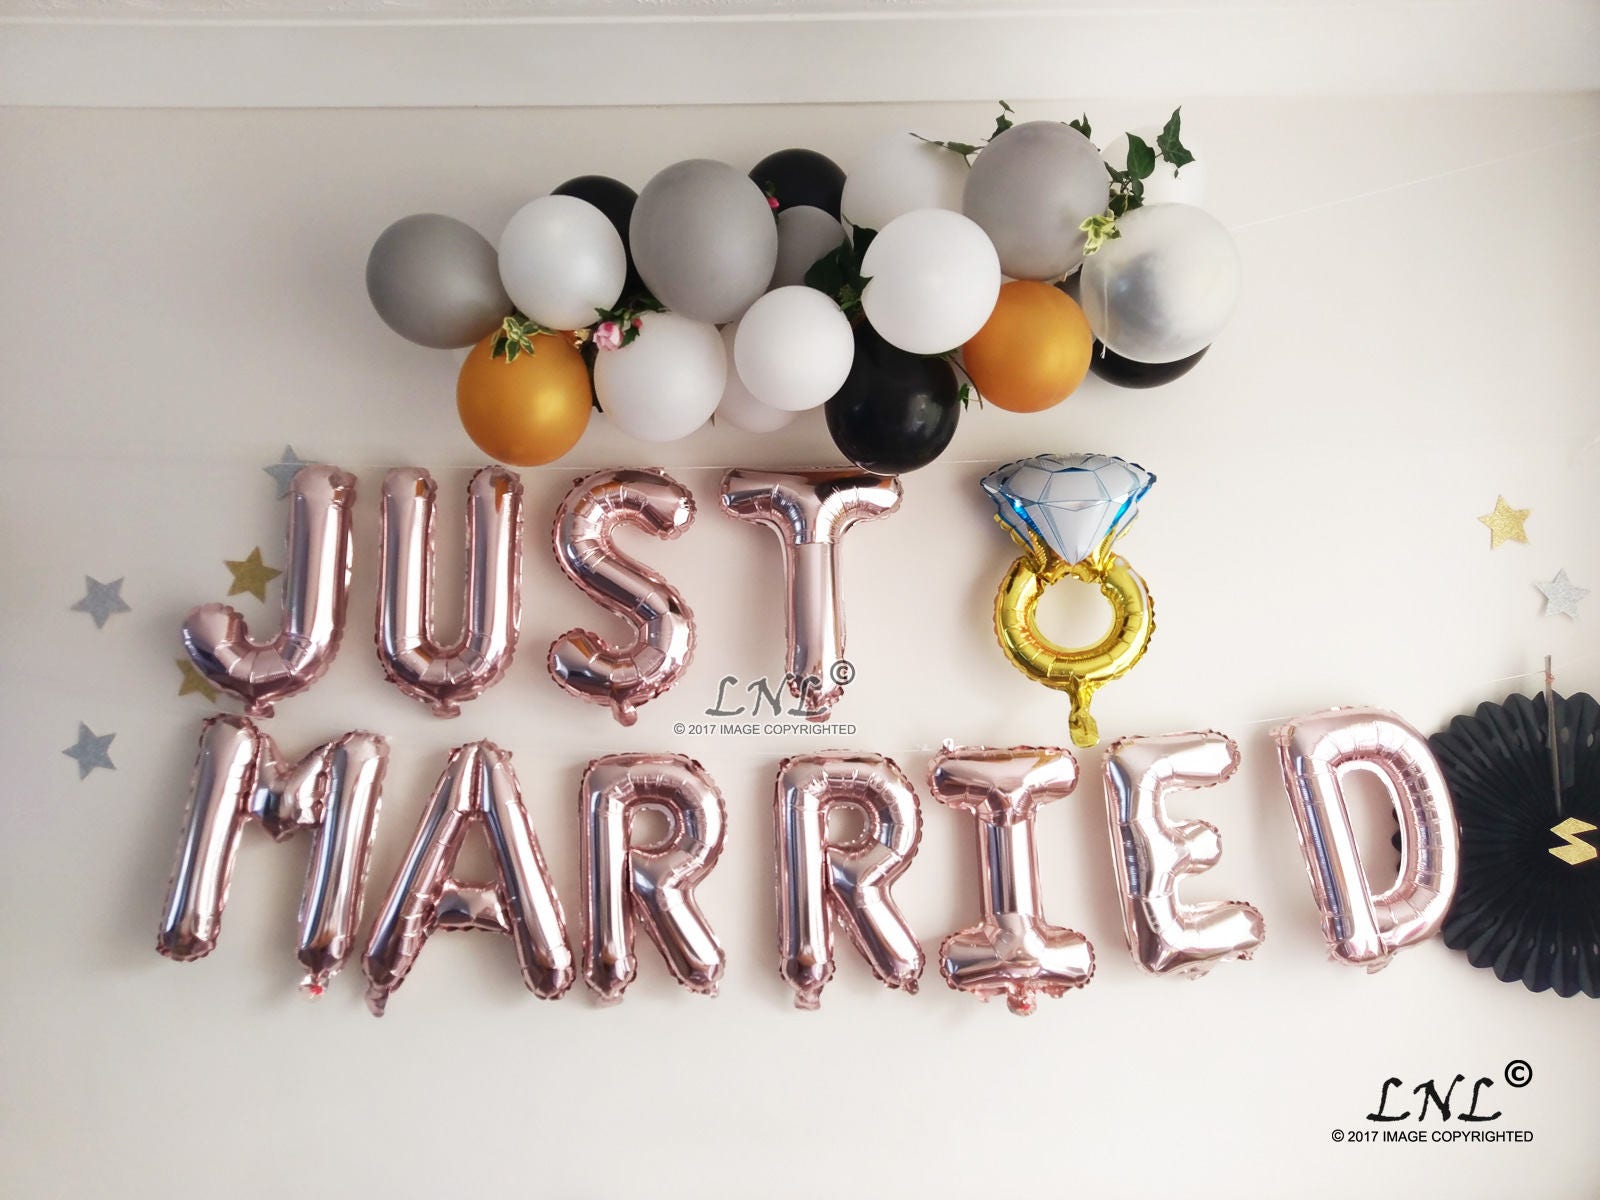 Ballons Mariage Décoration Just Married Decoration Mariage Ballon